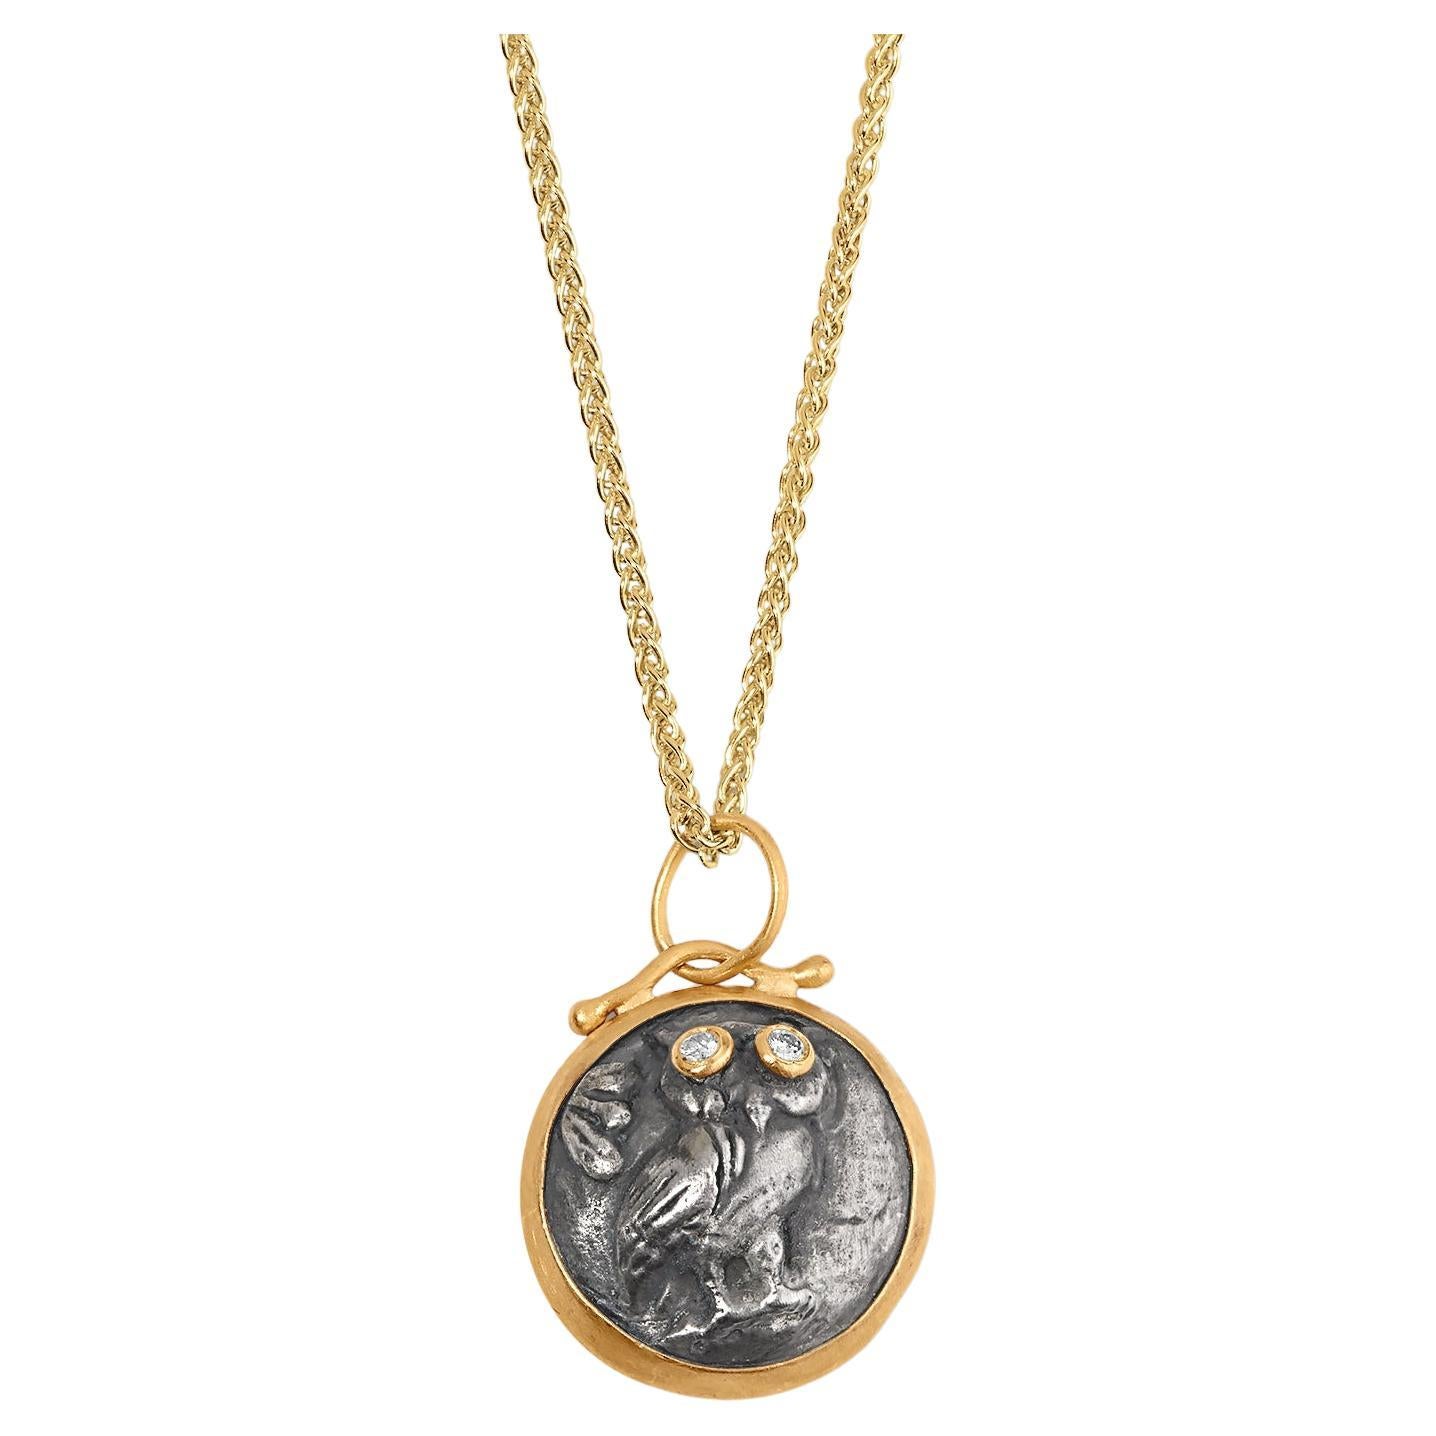 Athena's Owl with Diamond Eyes, Coin Charm Amulet Pendant Necklace 24kt Gold, SS For Sale